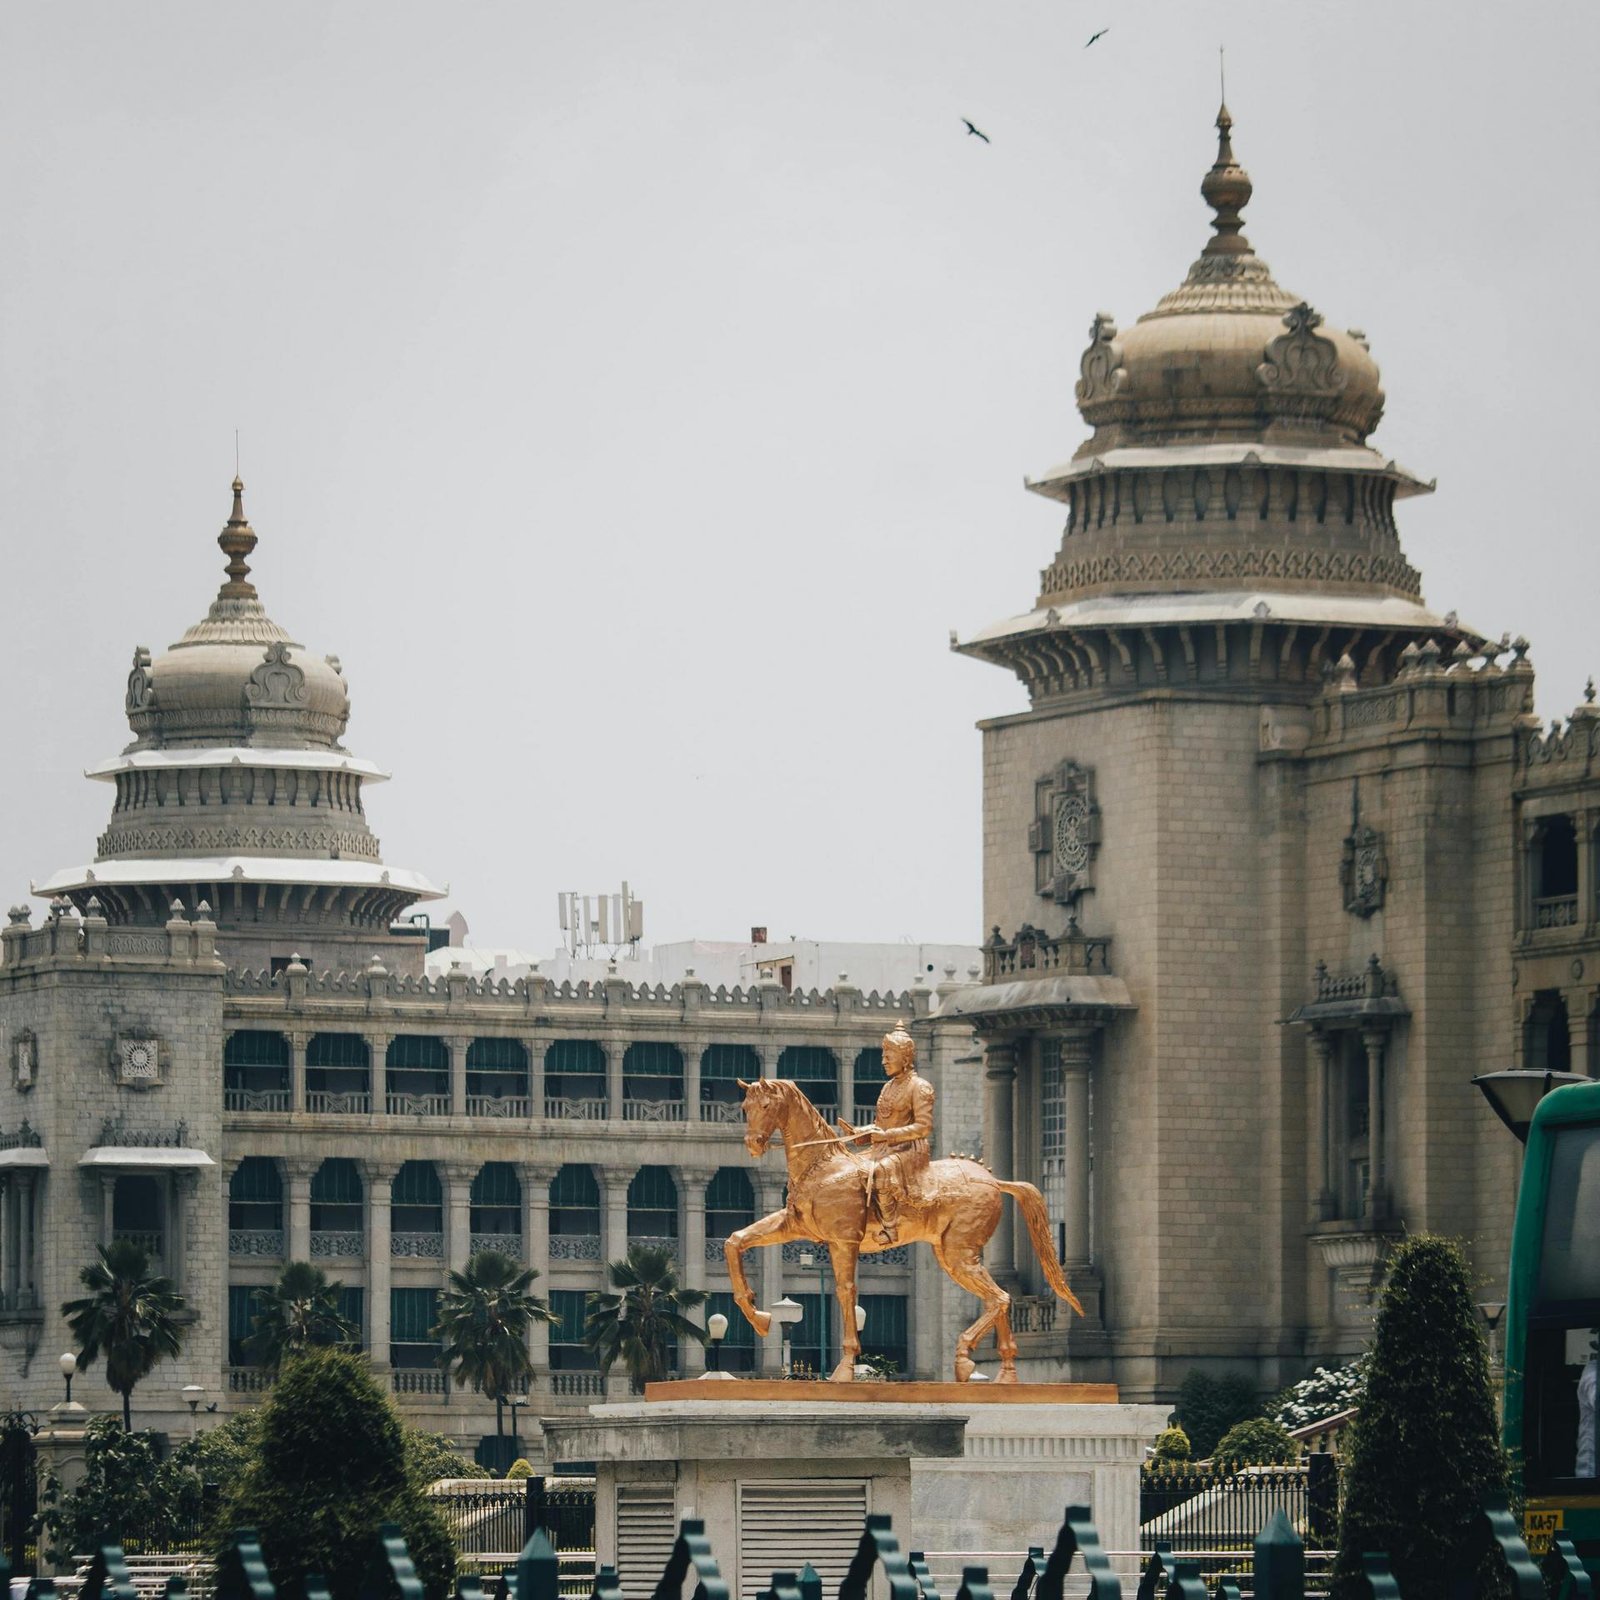 Bengaluru (also called Bangalore) is the capital of India's southern Karnataka state. The centre of India's high-tech industry, the city is also known for its parks and nightlife. By Cubbon Park, Vidhana Soudha is a Neo-Dravidian legislative building.